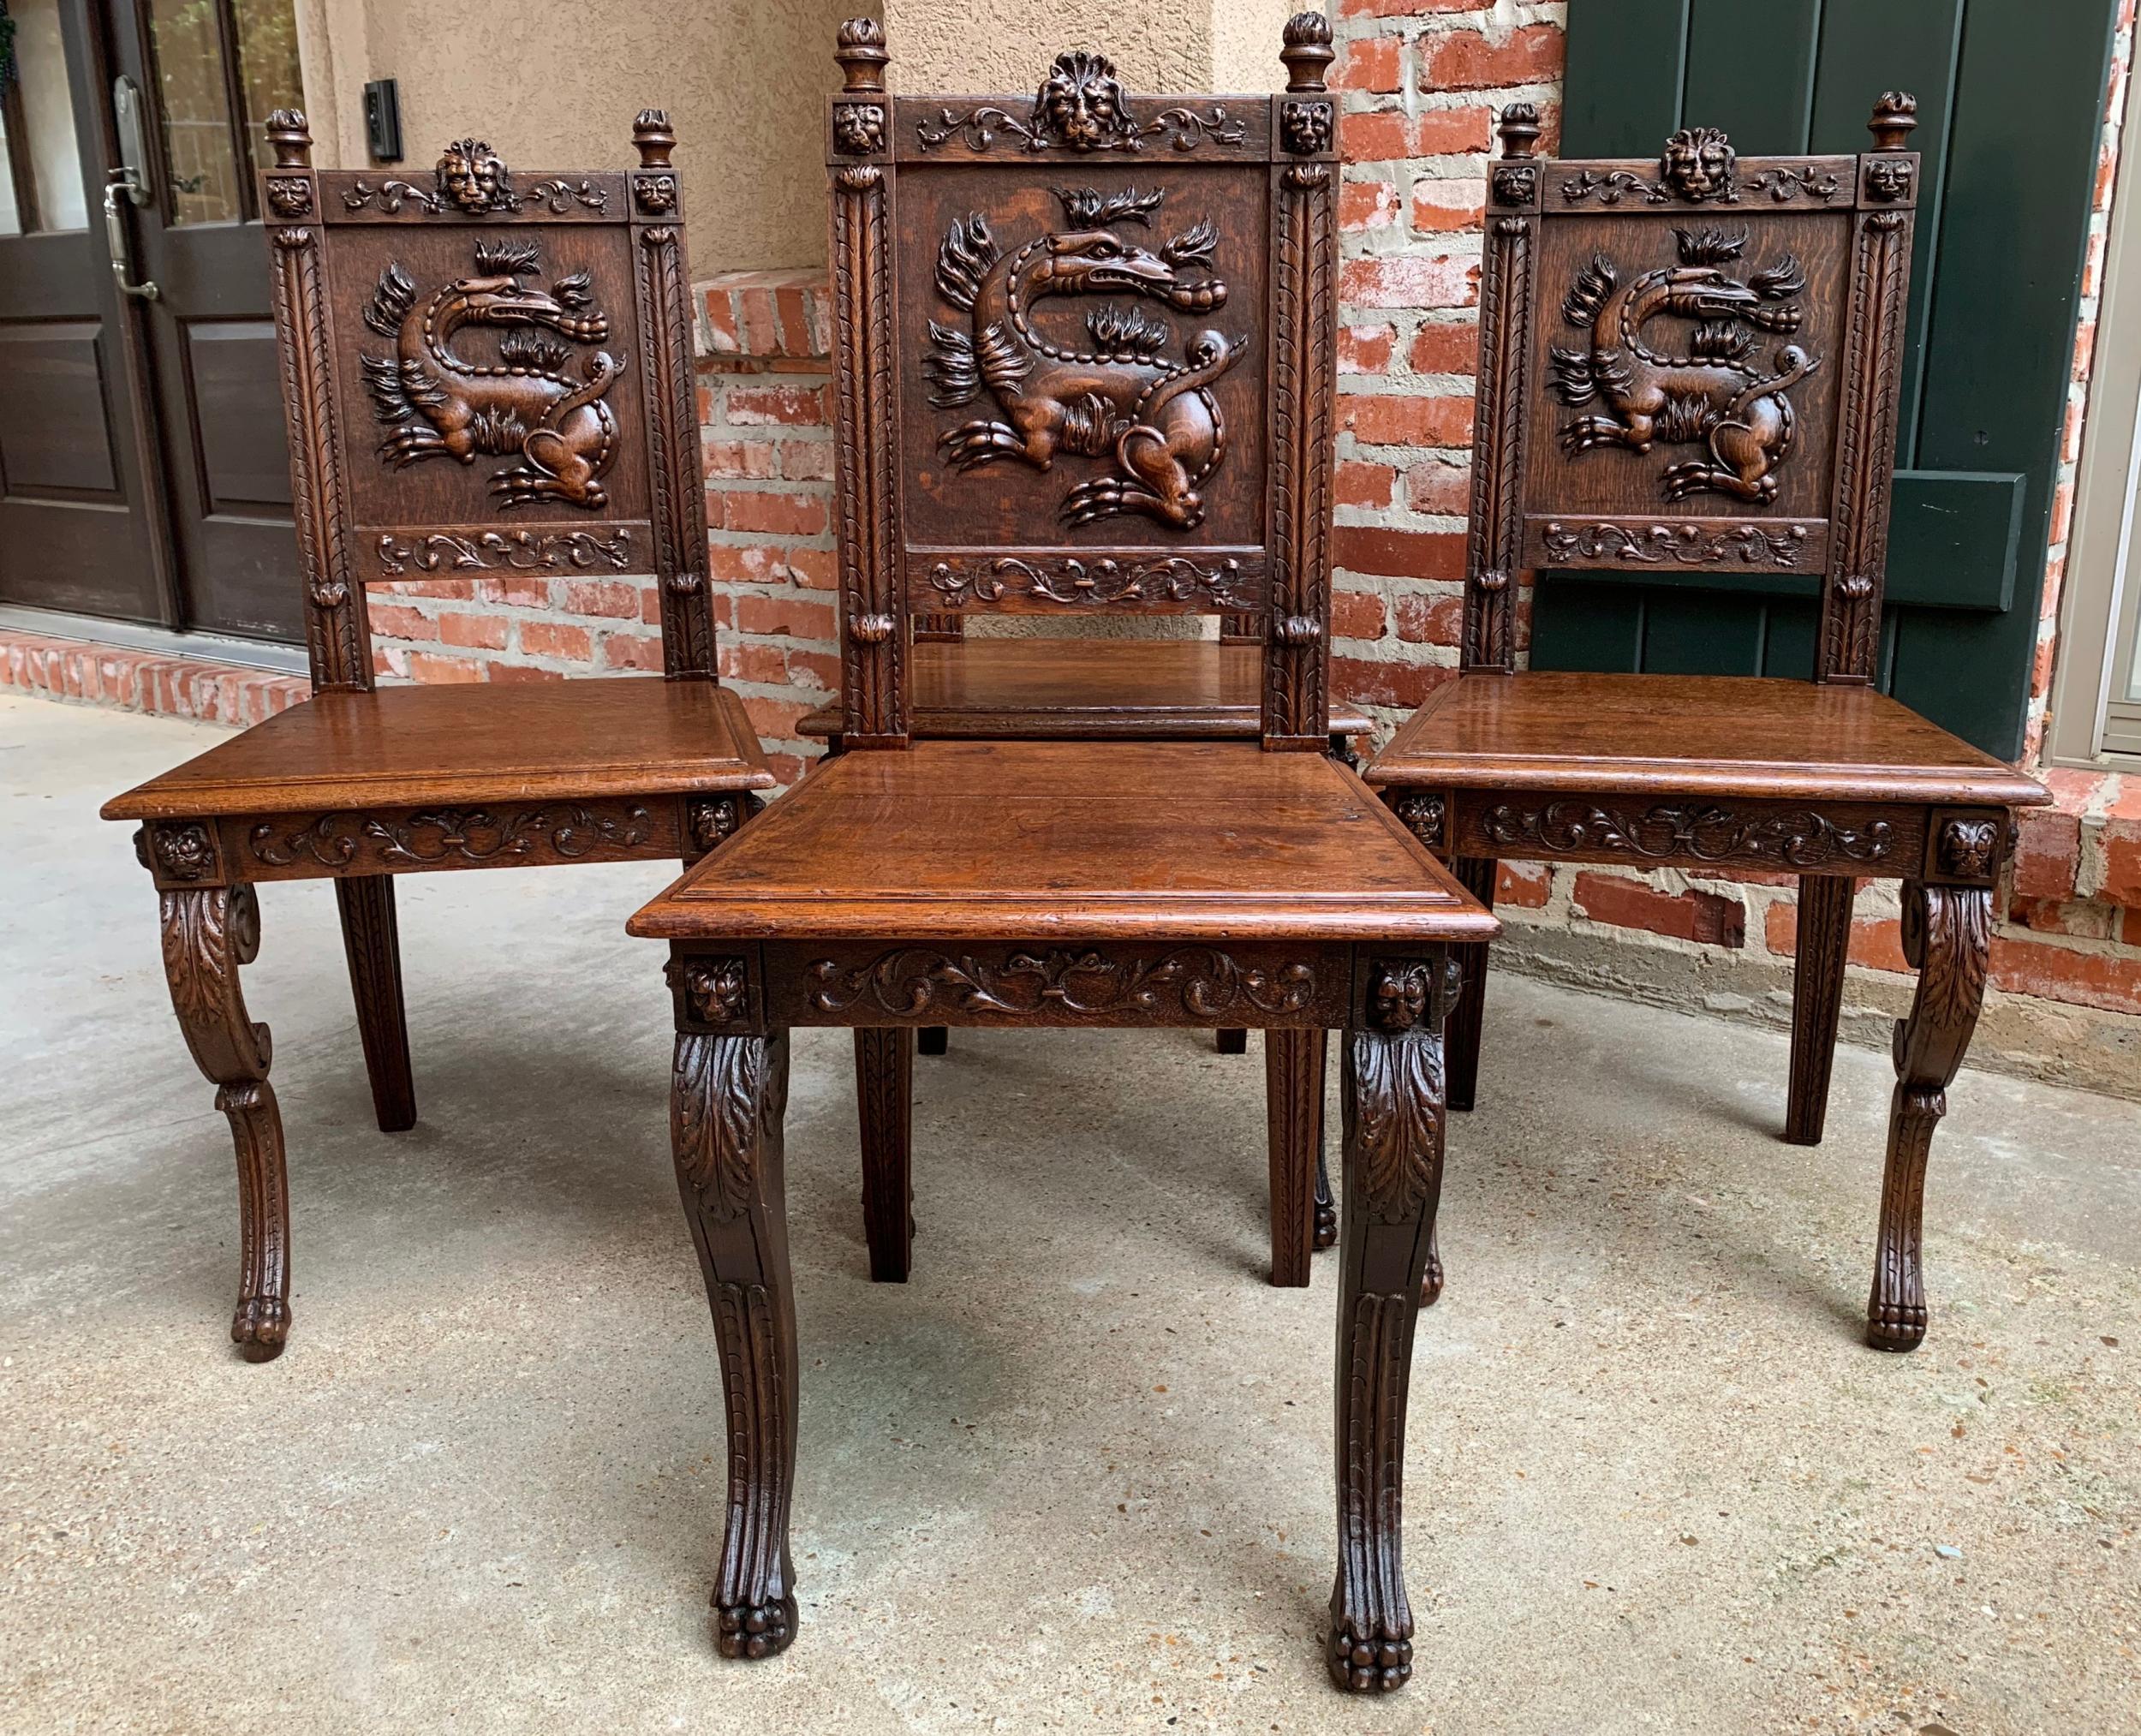 Set 4 antique French carved oak dining chair Renaissance dragon lion Gothic

~Direct from France~
~Unique set of 4 antique French carved chairs, suitable for a dining room, kitchen, and great as side chairs in any room~
~Carved embellishments